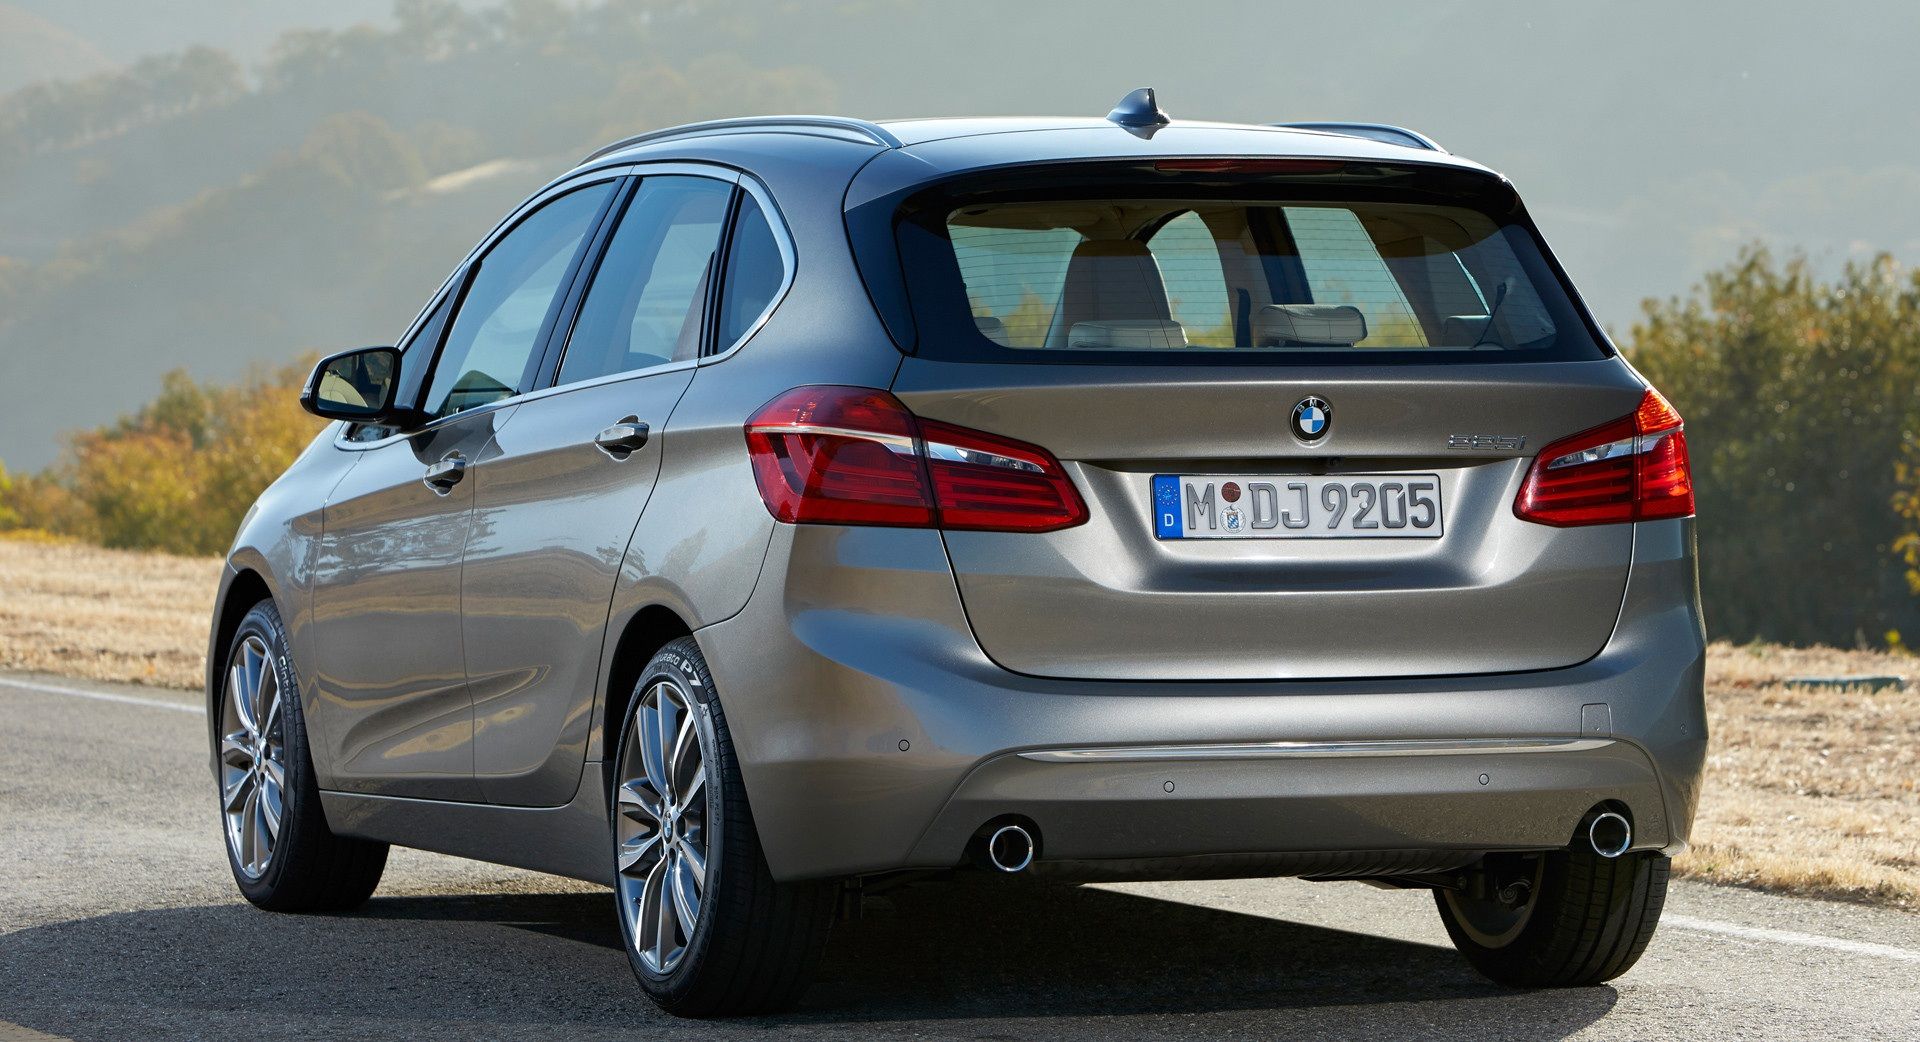 2015 Bmw 2 Series Active Tourer 225i Rear Photo (View 3 of 11)